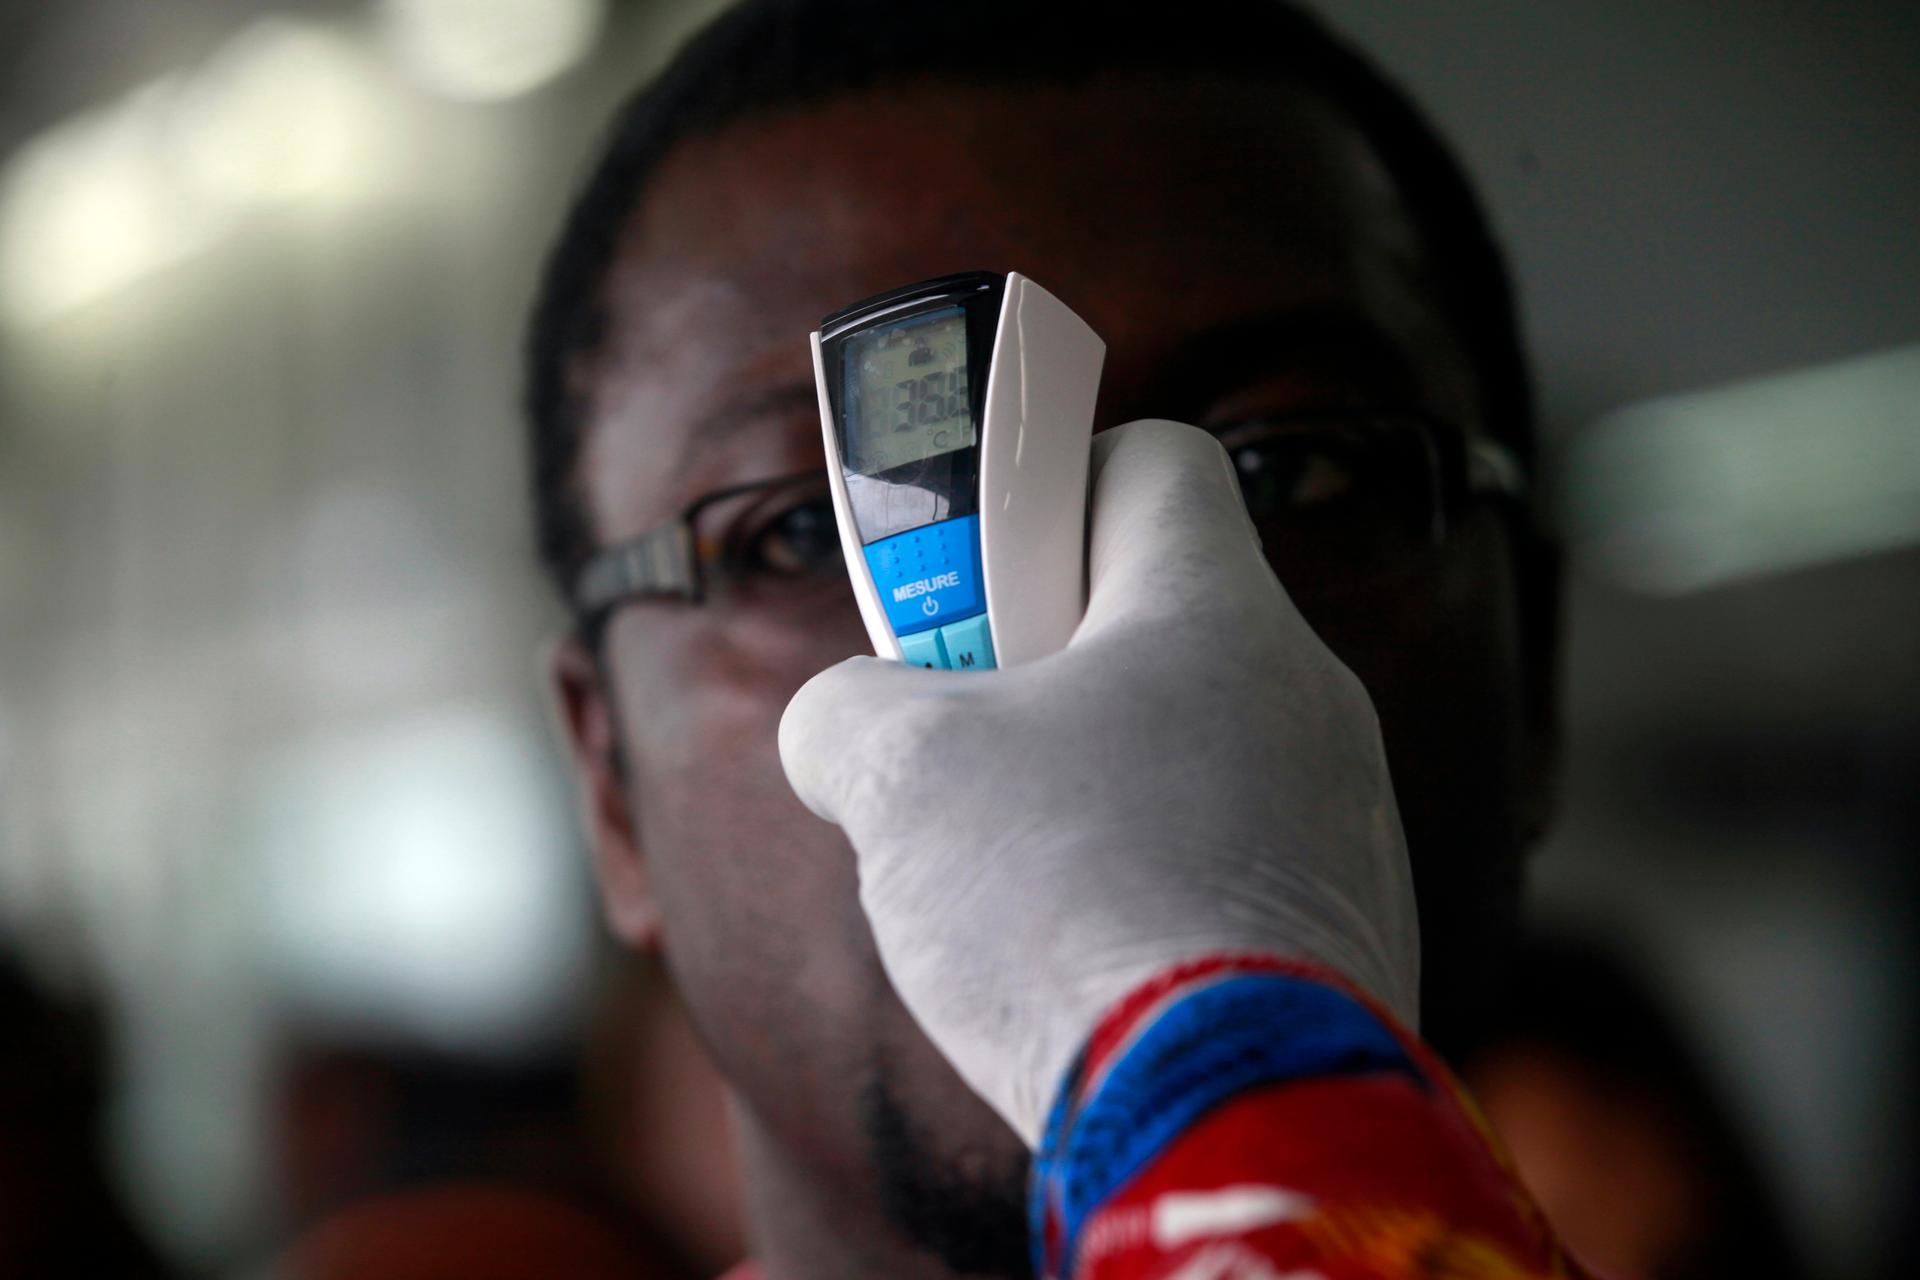 A health worker takes a passenger's temperature with an infrared digital laser thermometer at the Felix Houphouet Boigny international airport in Abidjan on August 13, 2014.